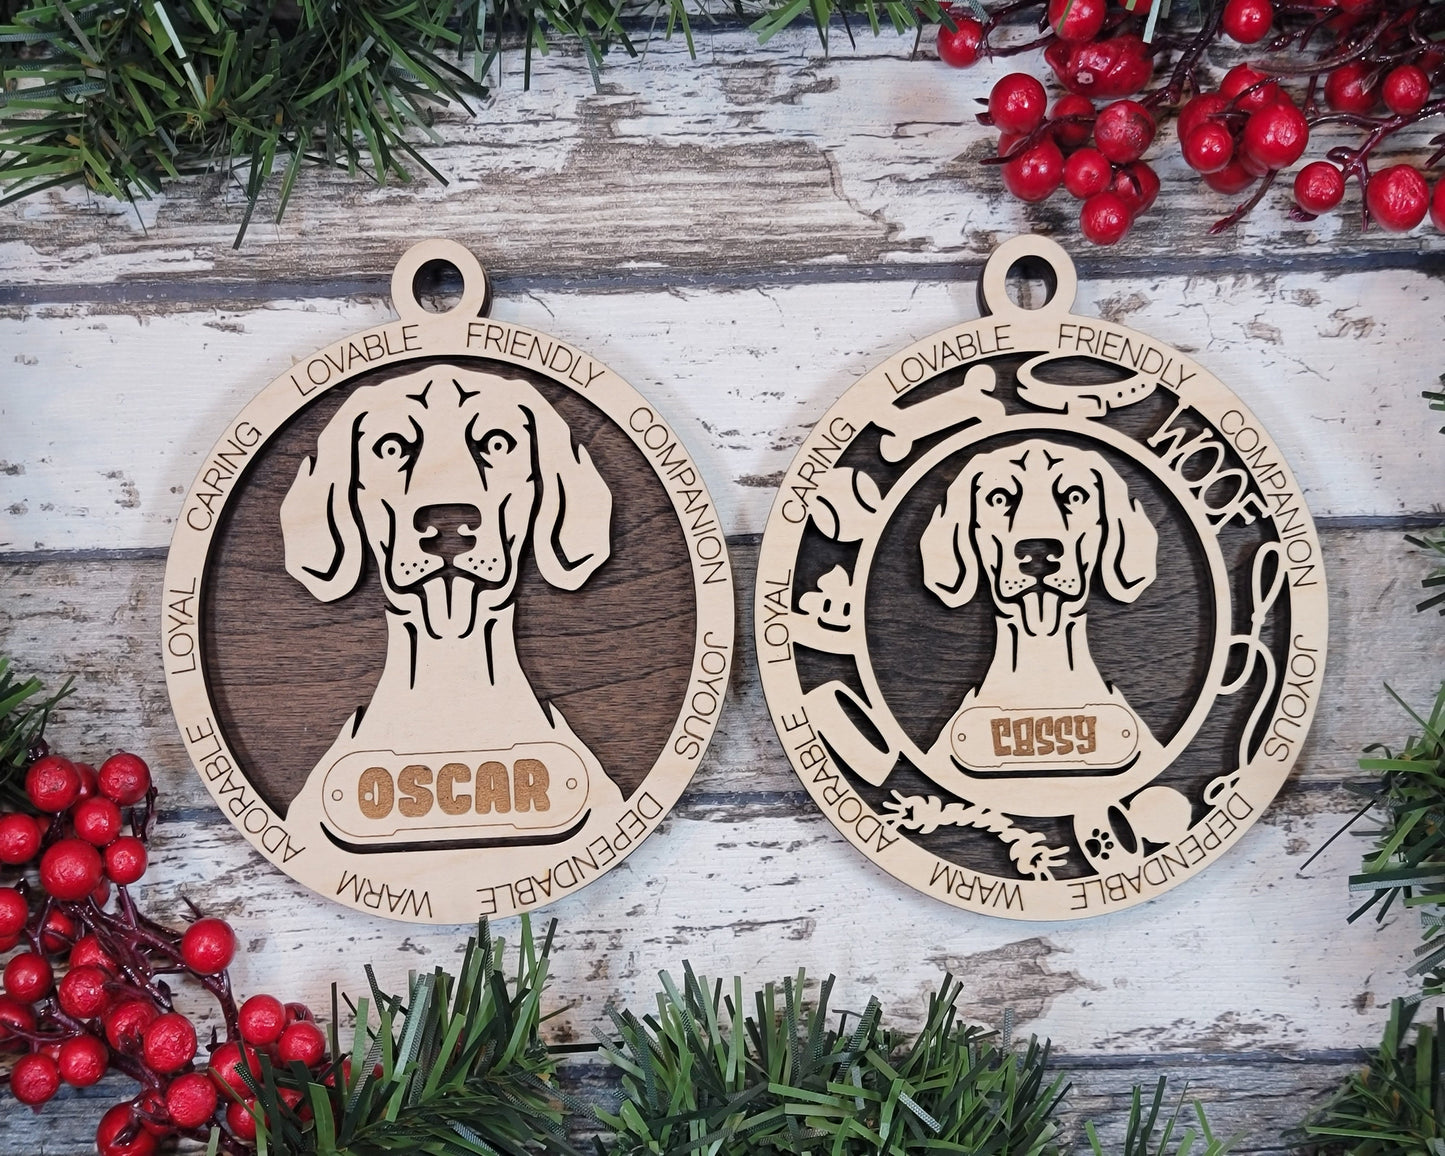 Weimaraner - Adorable Dog Ornaments - 4 Ornaments included - SVG, PDF, AI File Download - Sized for Glowforge